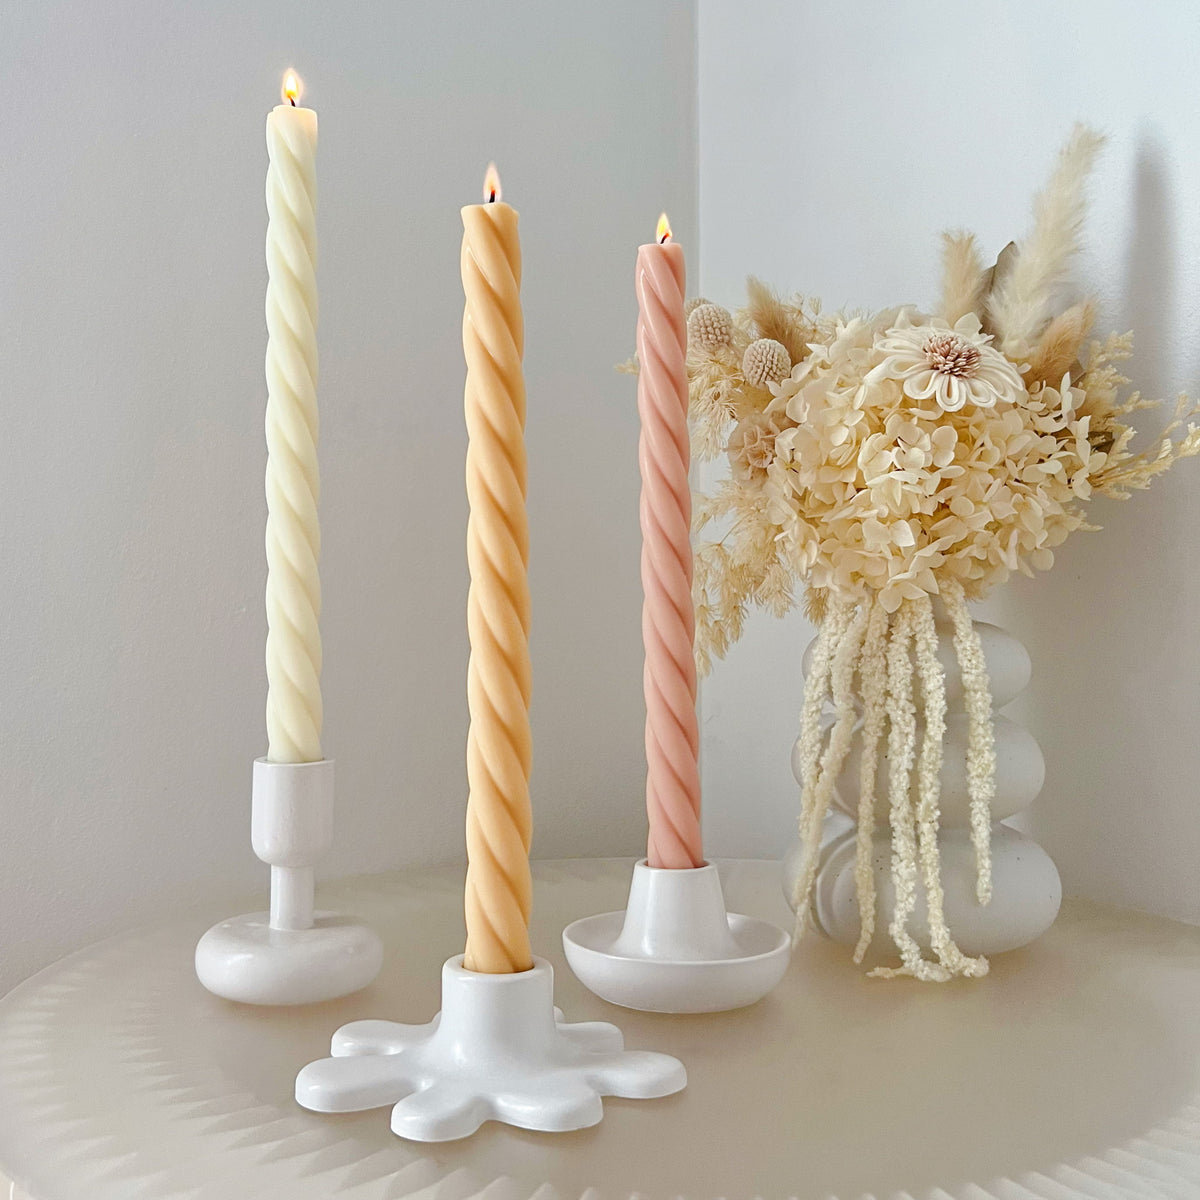 Handmade Retro Round Taper Candle Holder - LMJ Candles